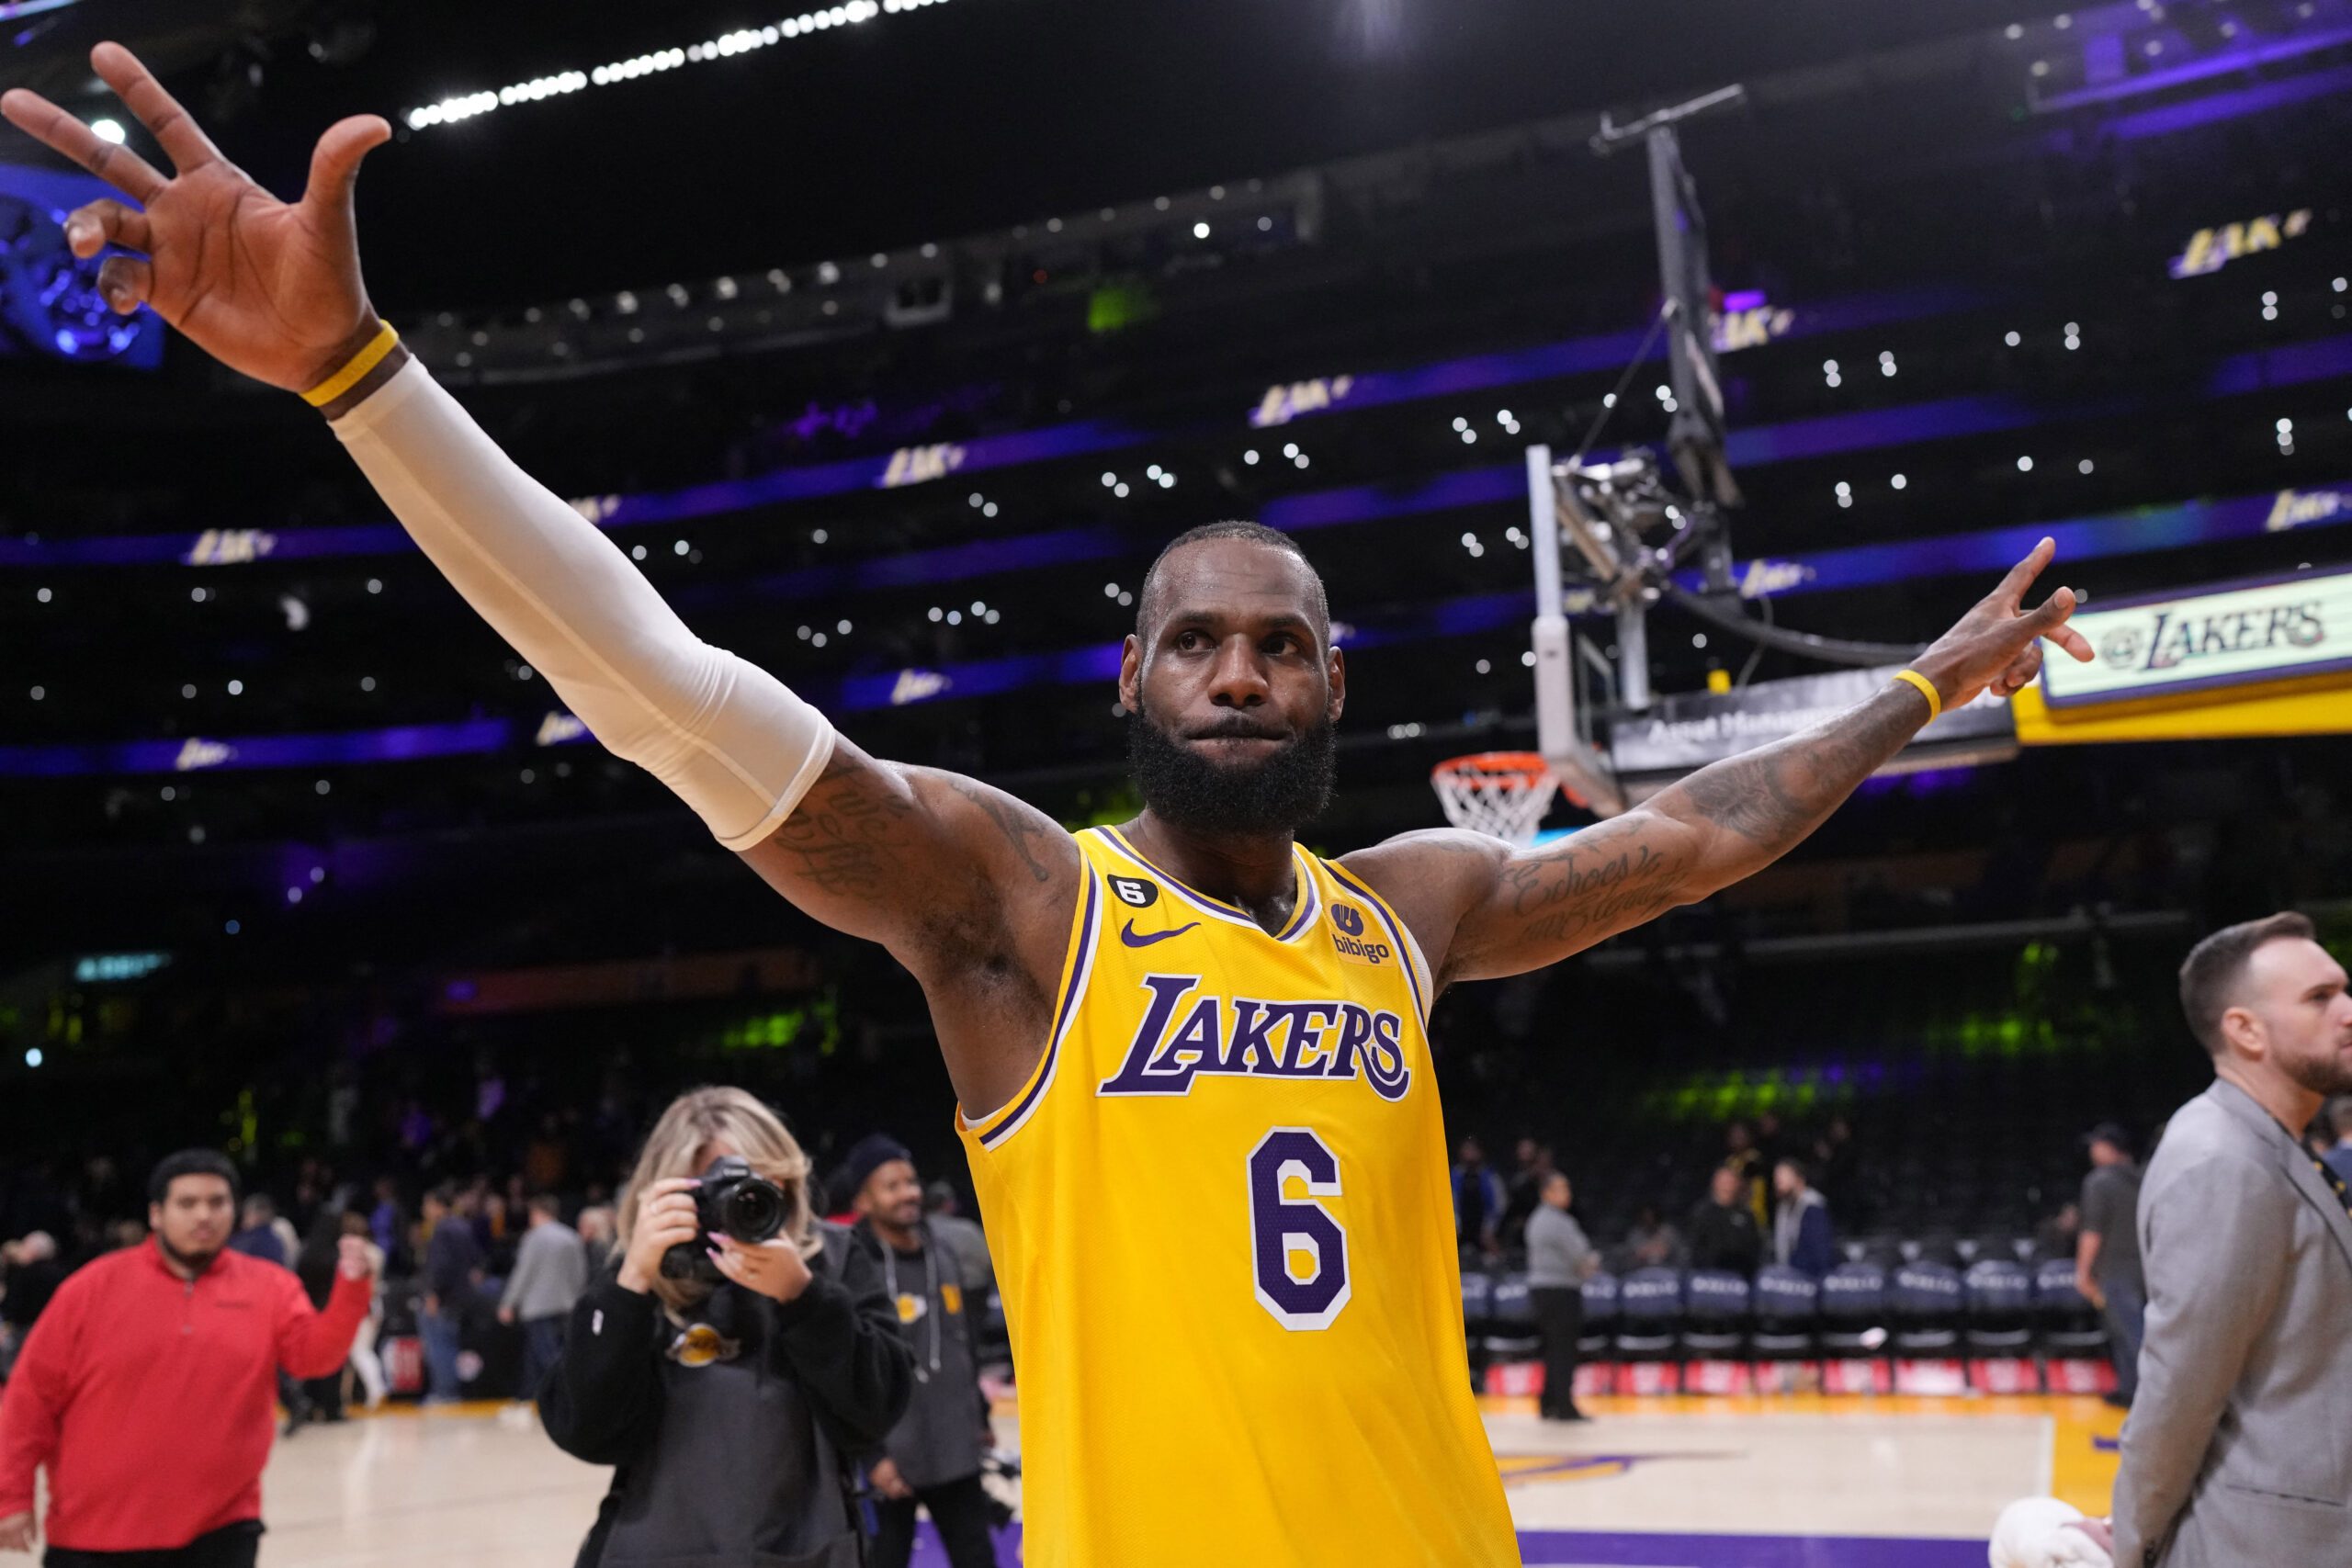 Lakers retired jersey numbers: Jeanie Buss explains why LeBron